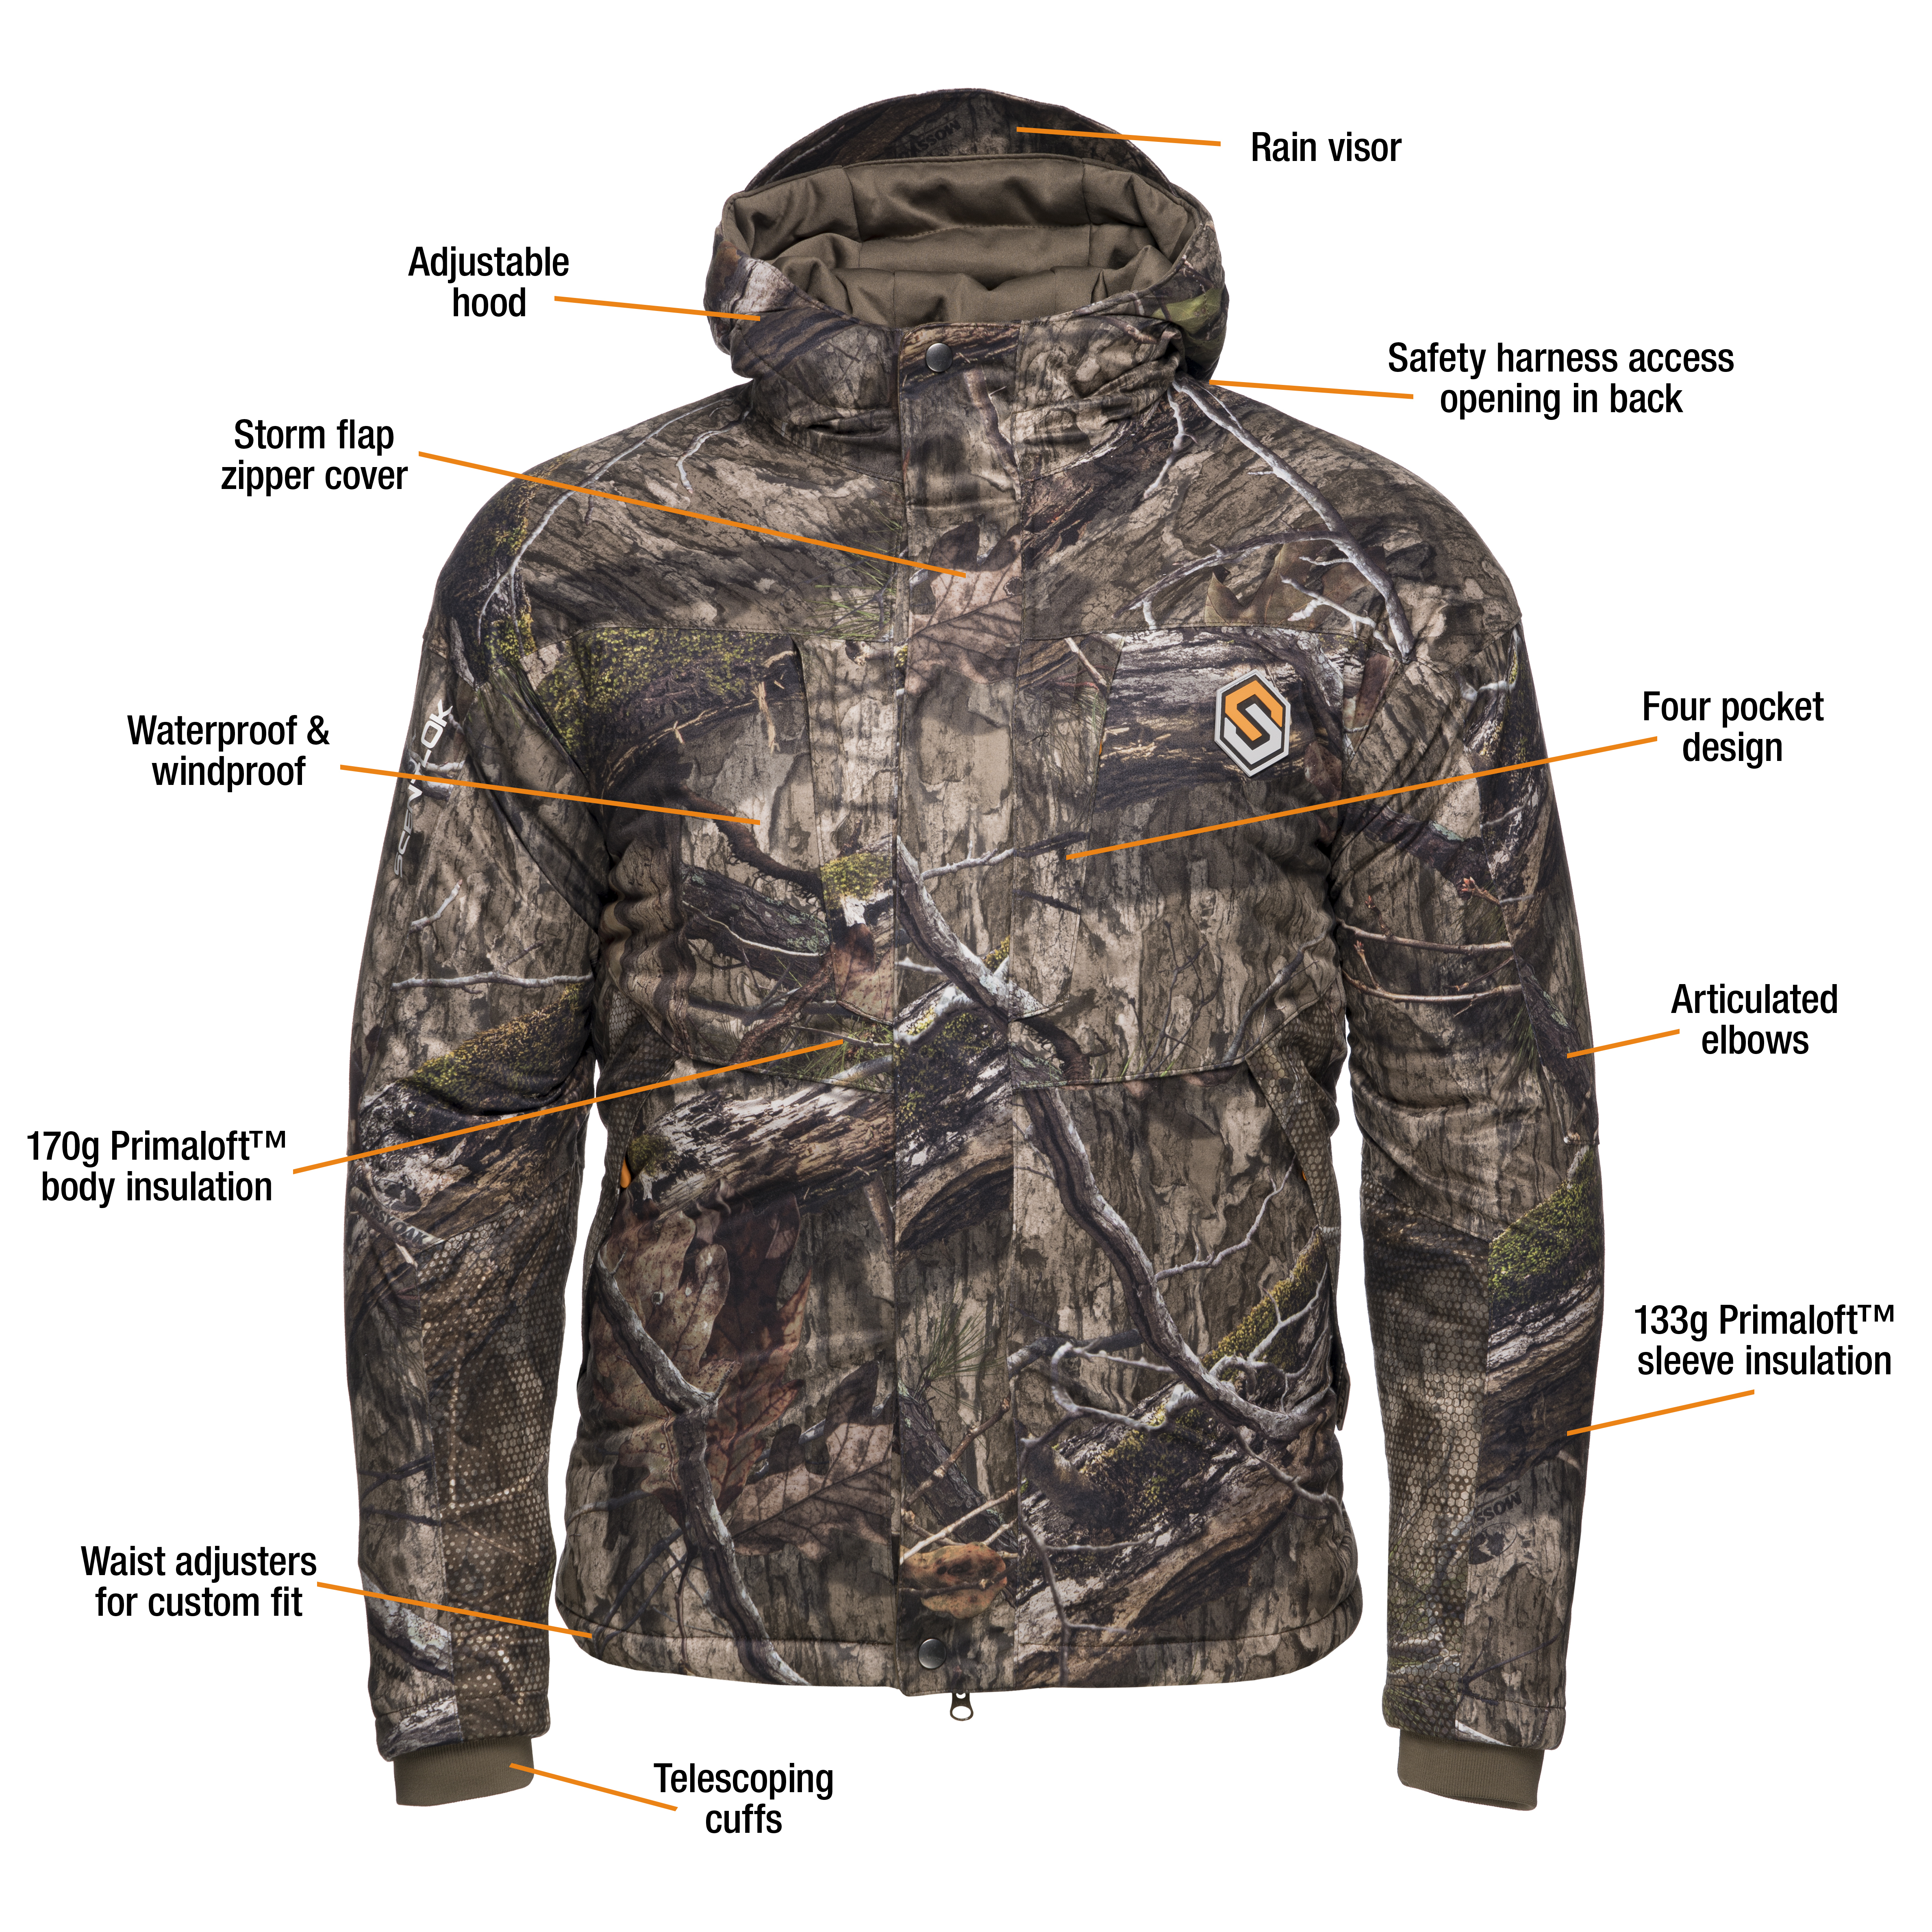 scent-lok-1035010-238-callouts-Hydrotherm-jacket-mossy-oak-country-dna-gila-waterproof-windproof-insulated-hunt-camo-camoflauge-big-tall-bigcamo